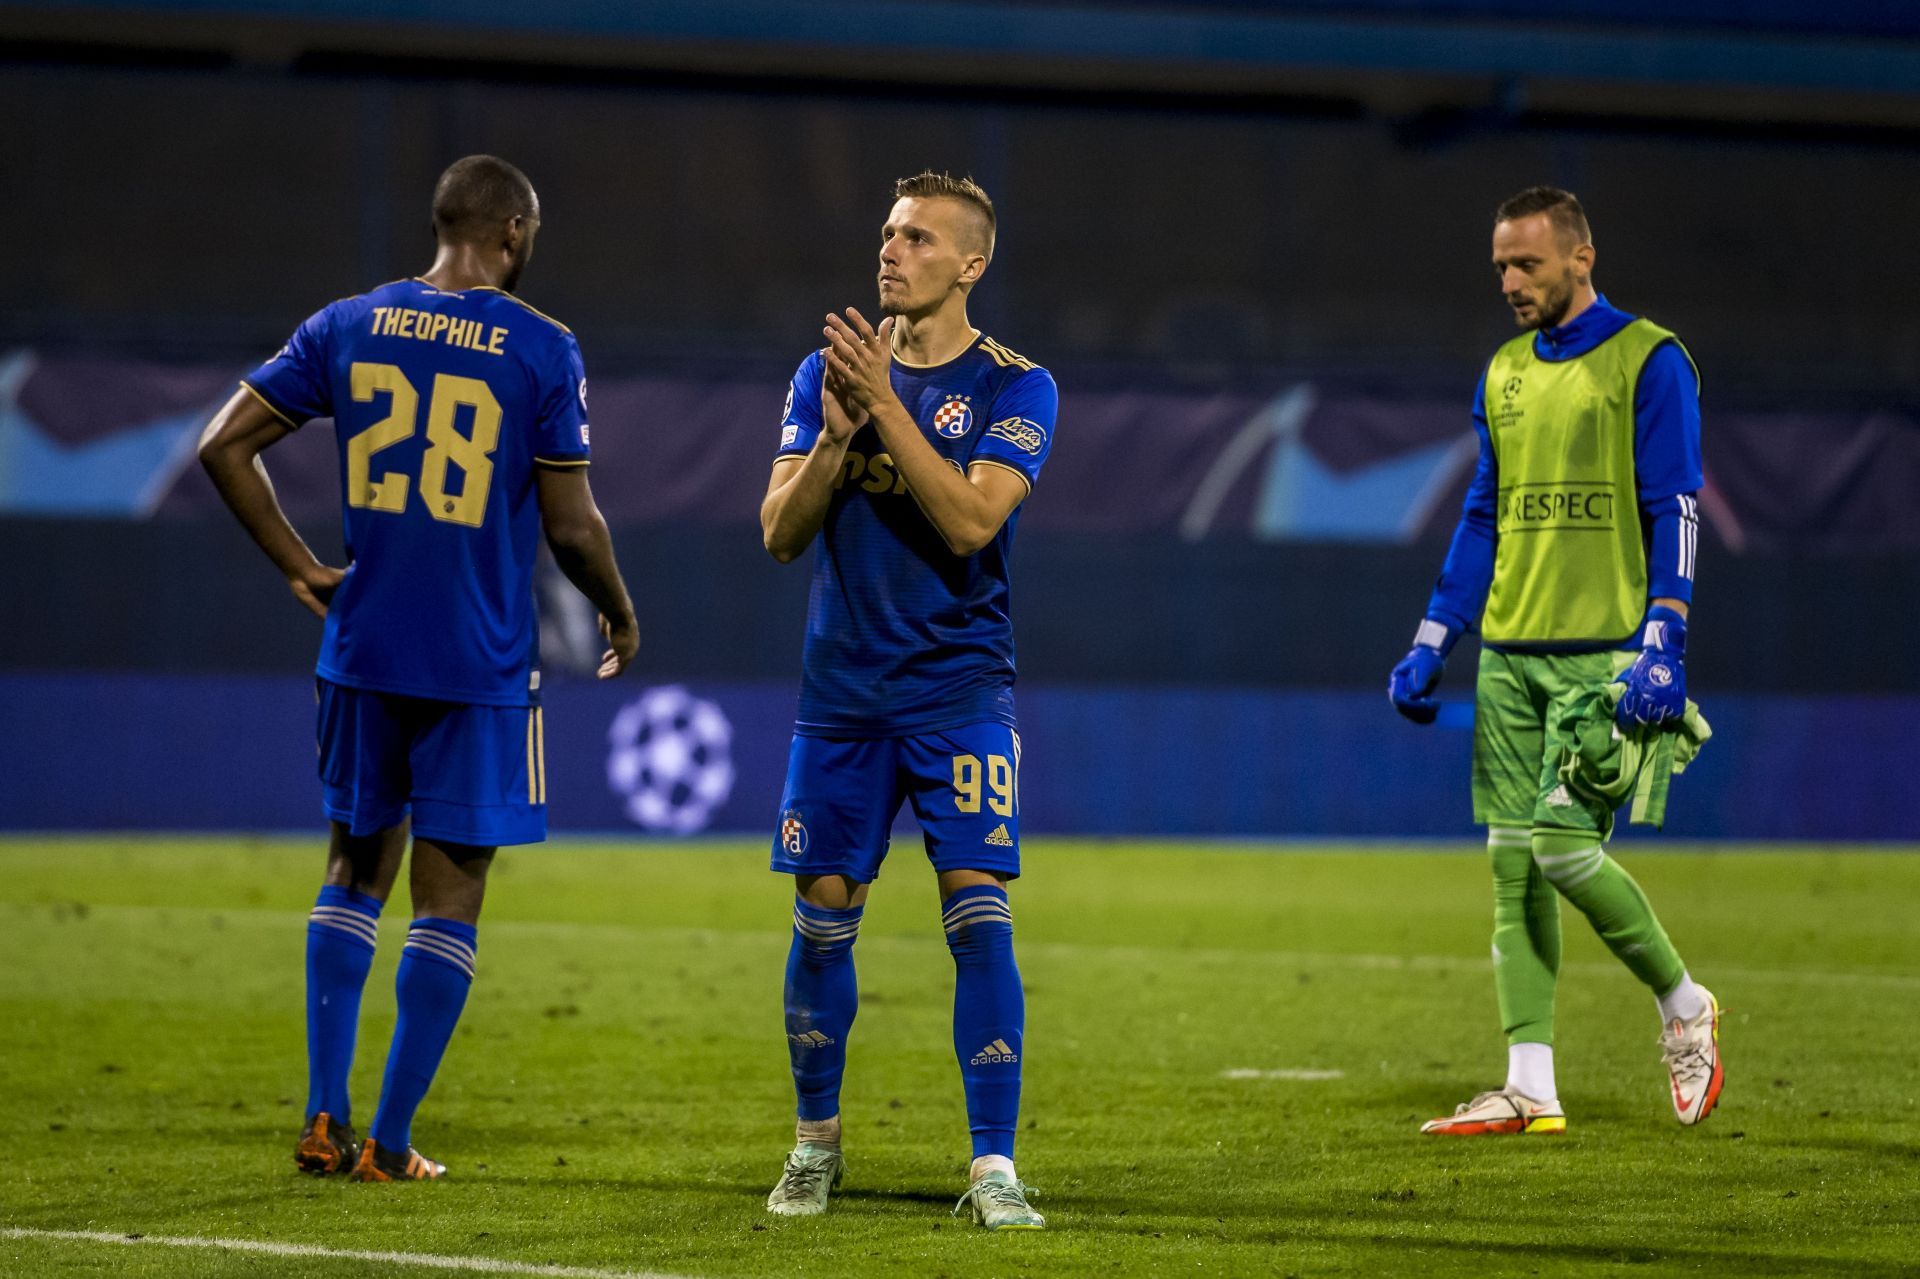 Dinamo Zagreb need to overcome Shkupi in their second-round UEFA Champions League qualifying fixture on Tuesday